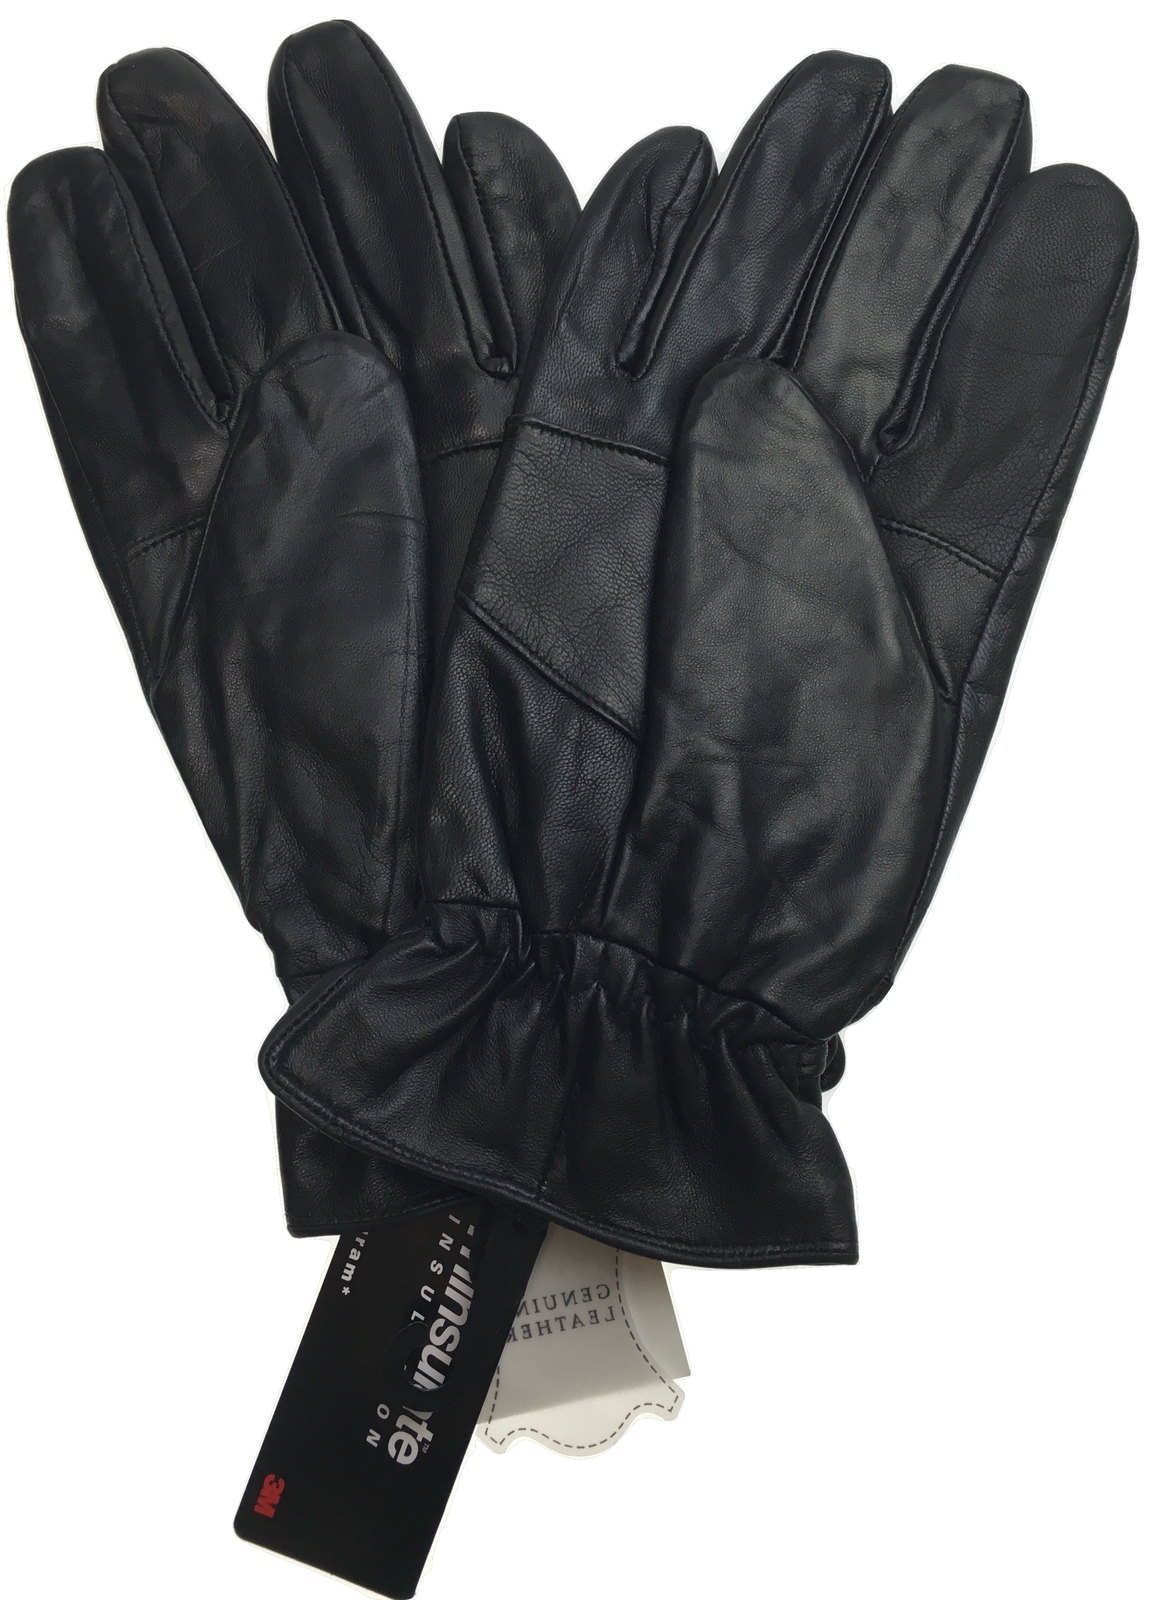 3M THINSULATE Men's Genuine Leather Gloves Patch Thermal Lining Warm ...